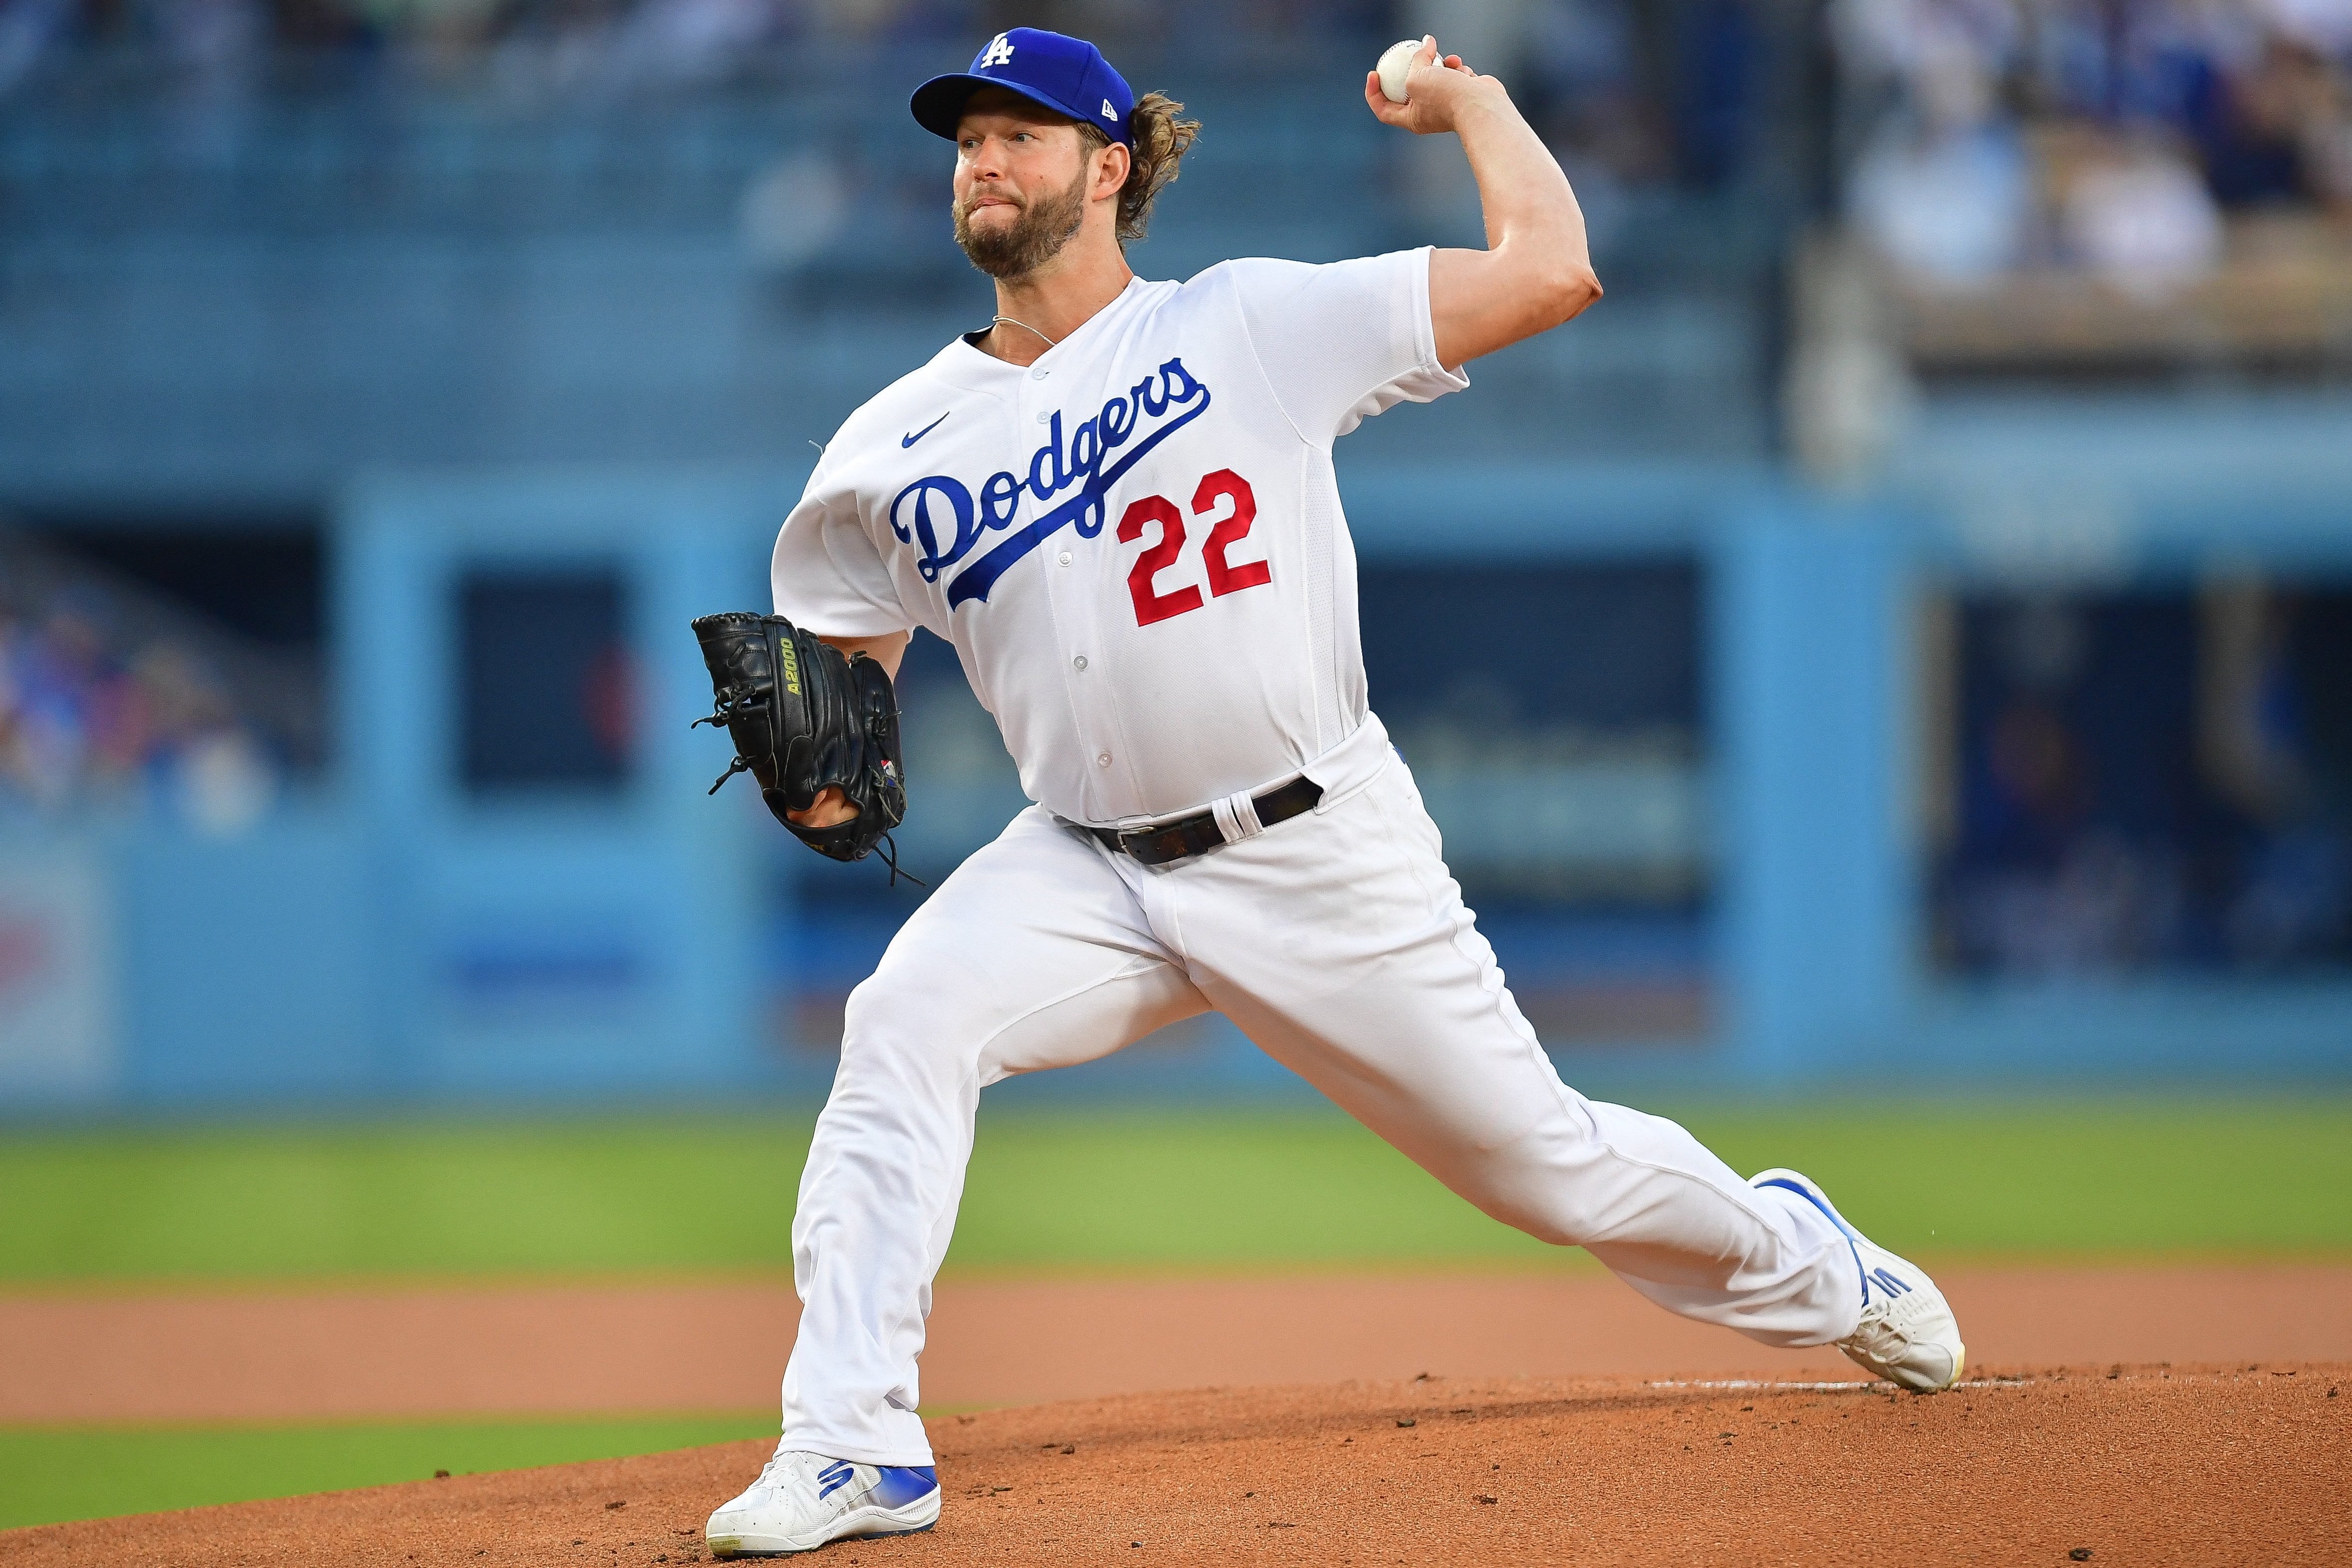 Clayton kershaw American professional baseball pitcher for the Los